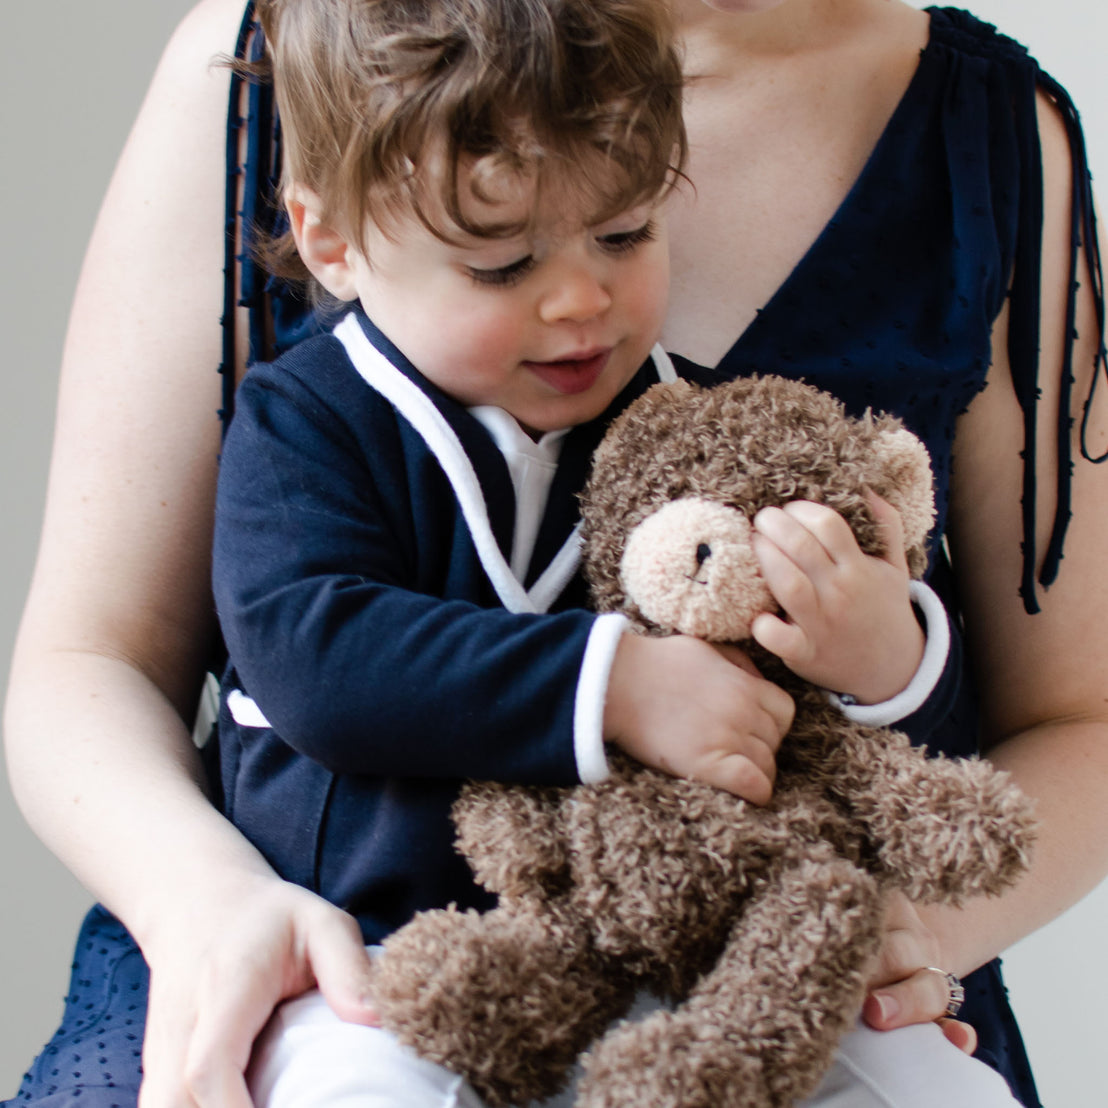 Smiling baby boy sitting on his mother's lap. He is wearing the Elliott 3-Piece Suit, including the jacket, pants, and onesie. He is also holding the Cubby Bear.